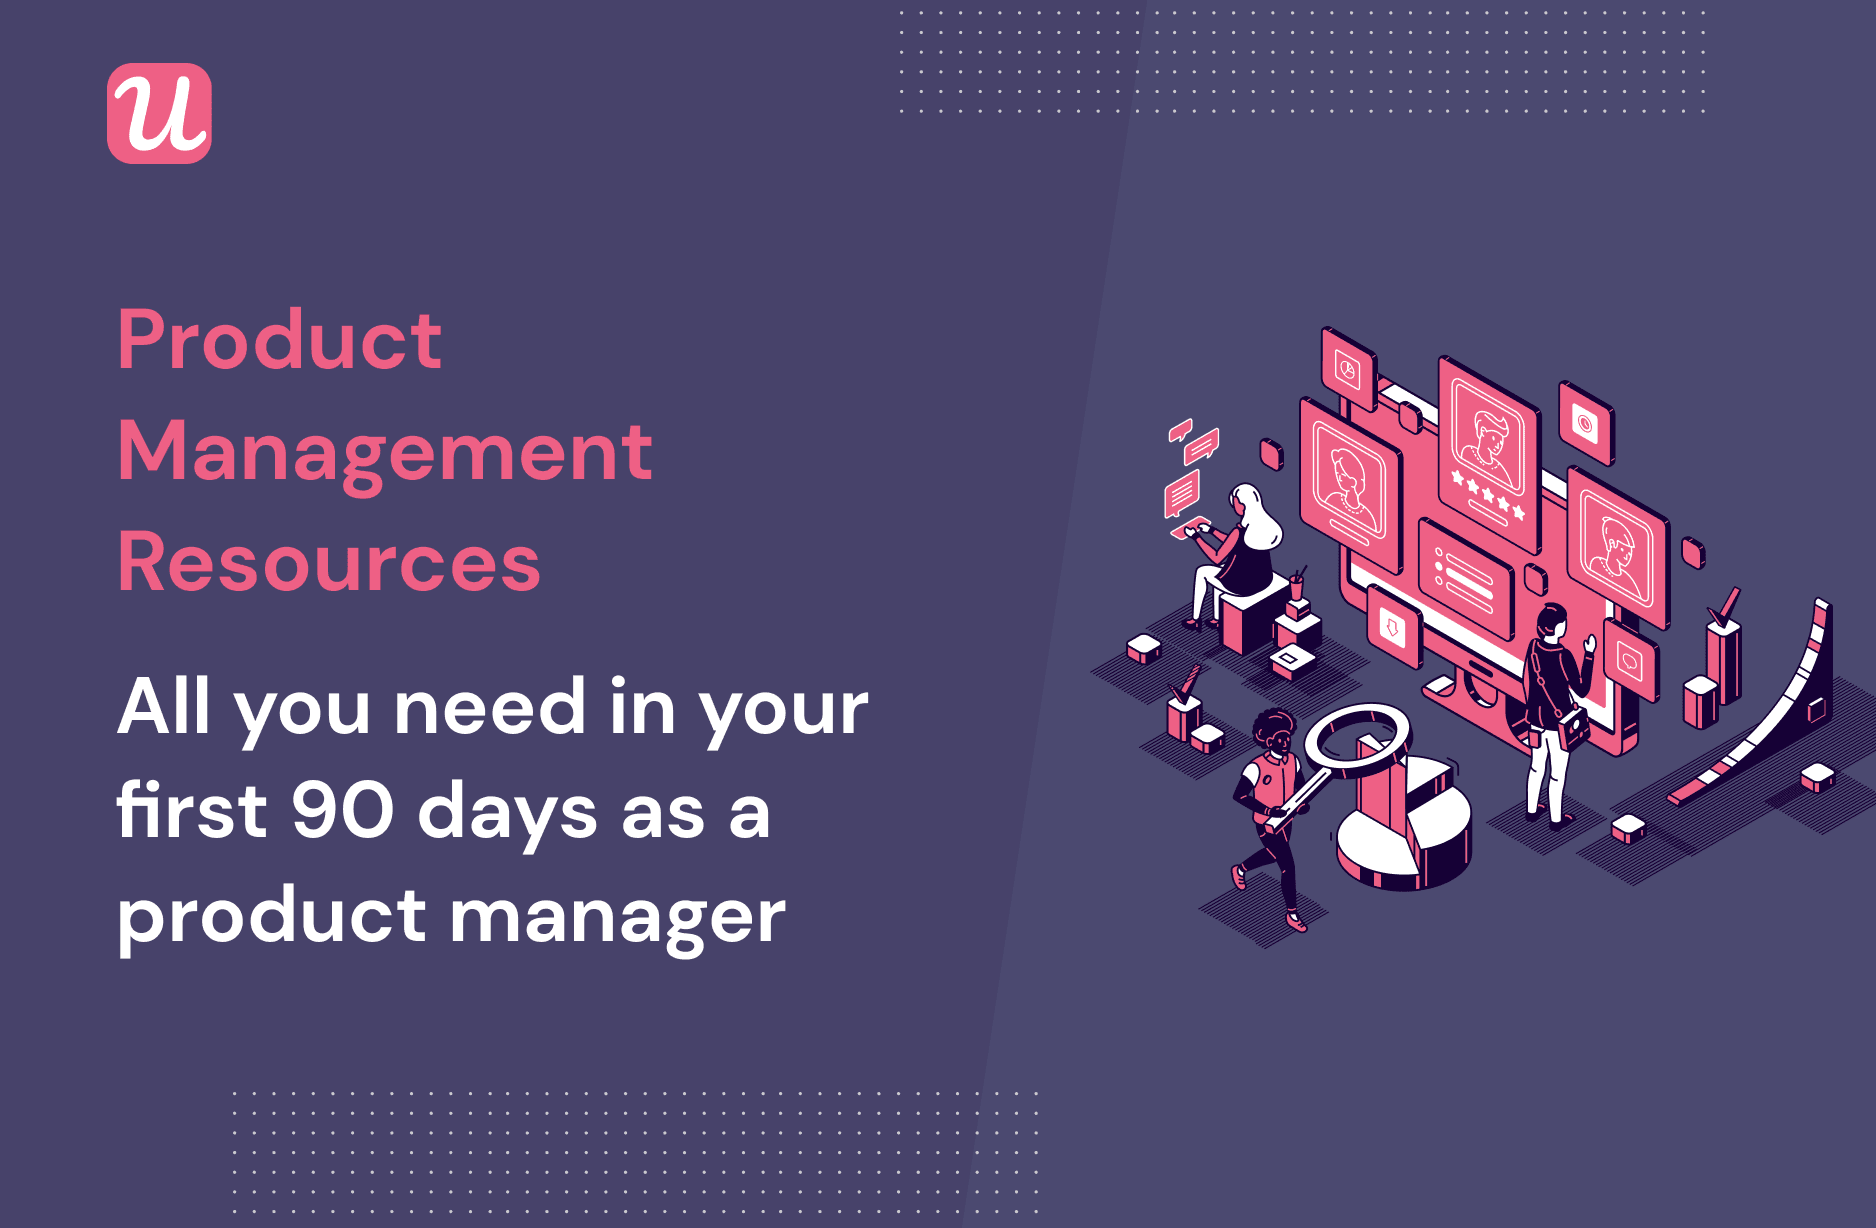 Product Management Resources: All you need in your first 90 Days as a Product Manager